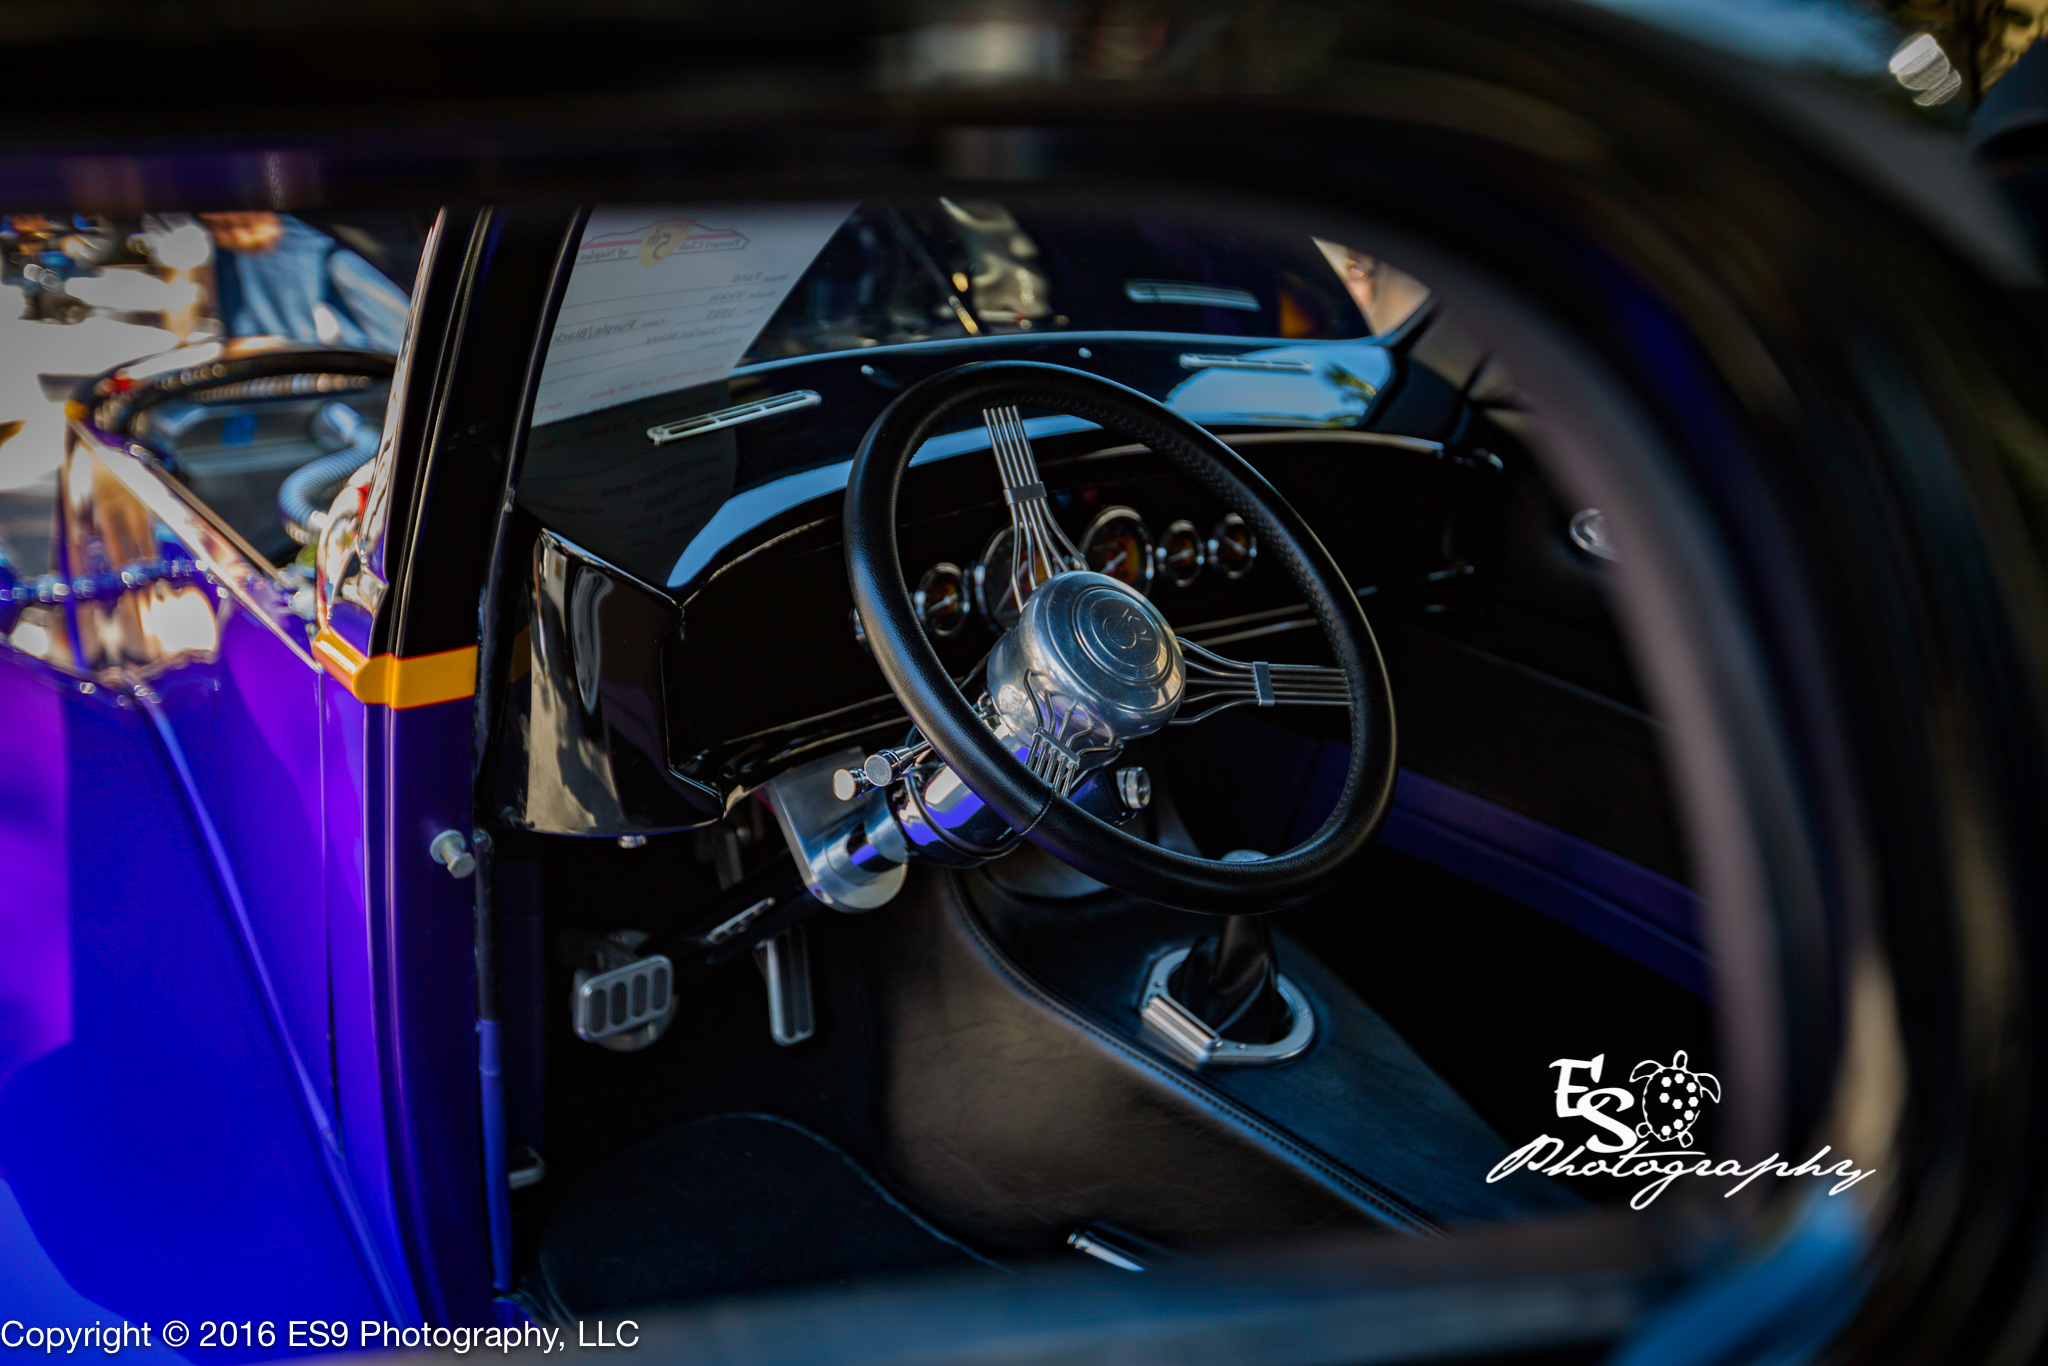 Cars on 5th Ford Vickie Inside @ ES9 Photography 2016 Naples Photographer.jpg